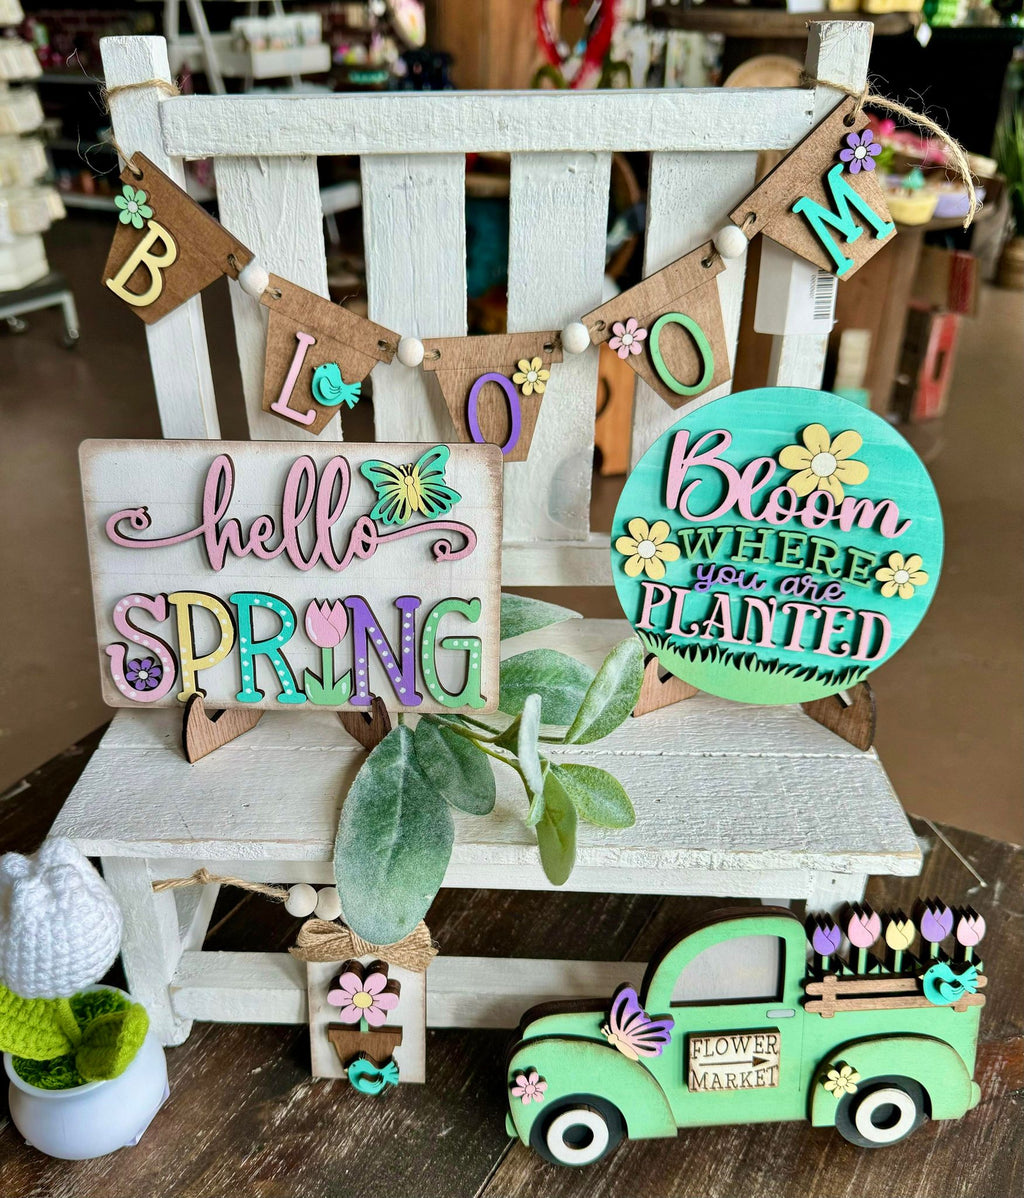 3D Tiered Tray Decor - Hello Spring Bloom where you are planted